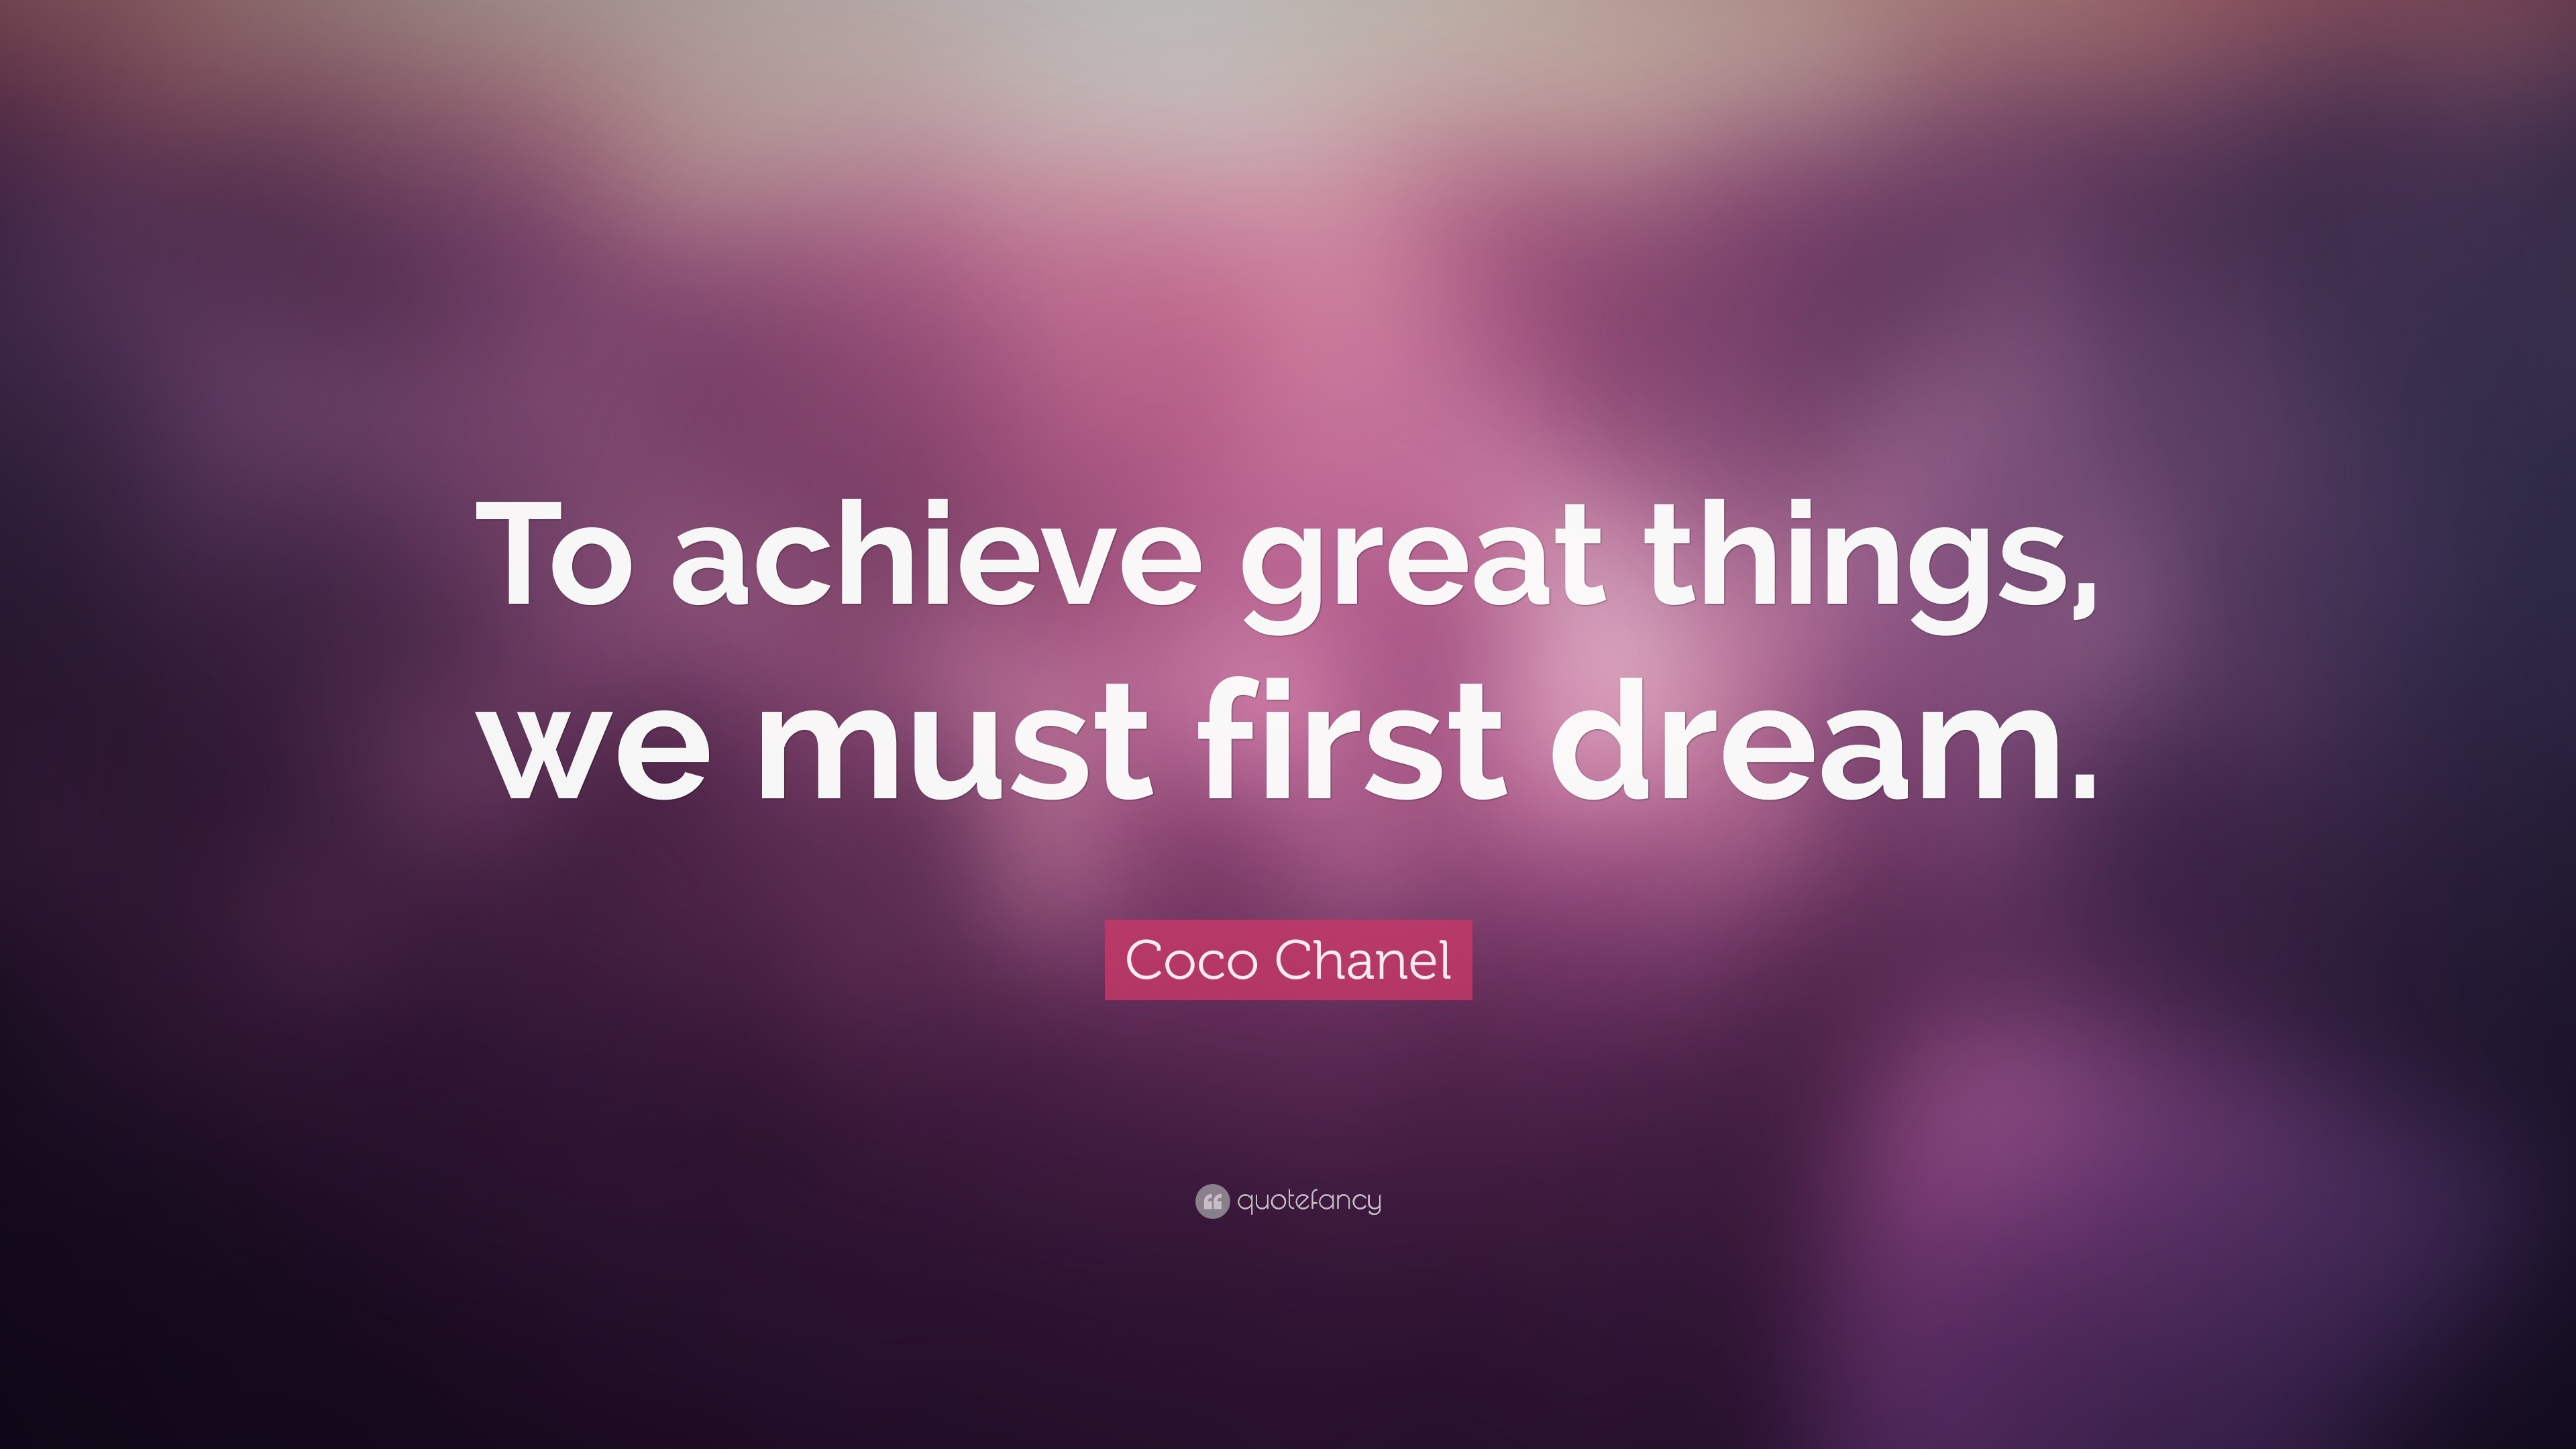 3840x2160 Coco Chanel Quote: “To achieve great things, we must first dream.”